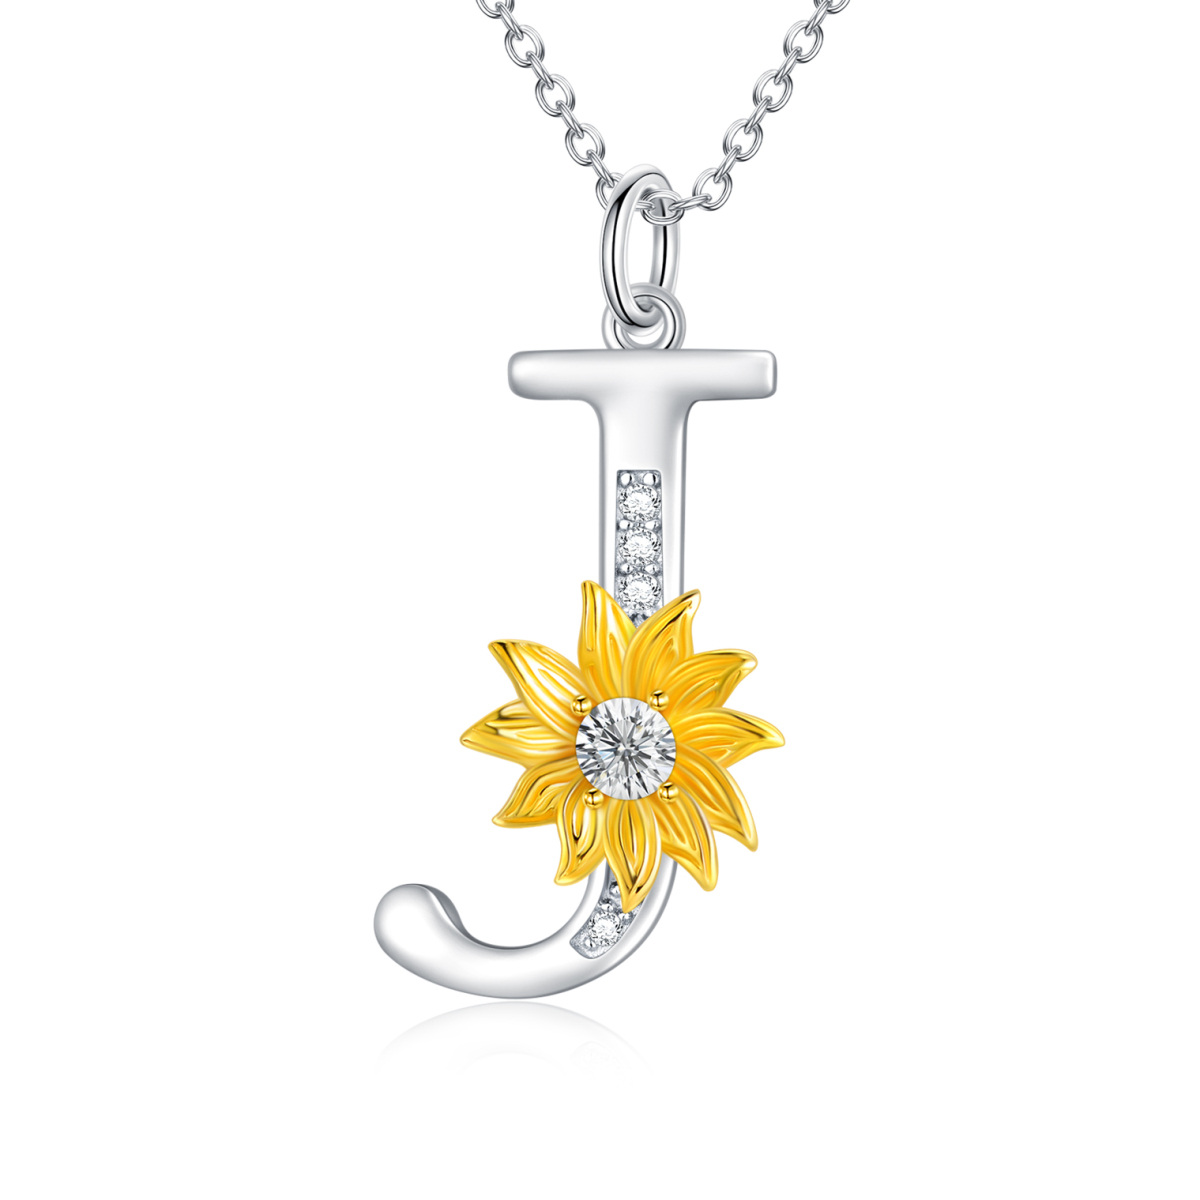 Sterling Silver Two-tone Circular Shaped Crystal Sunflower Pendant Necklace with Initial Letter J-1